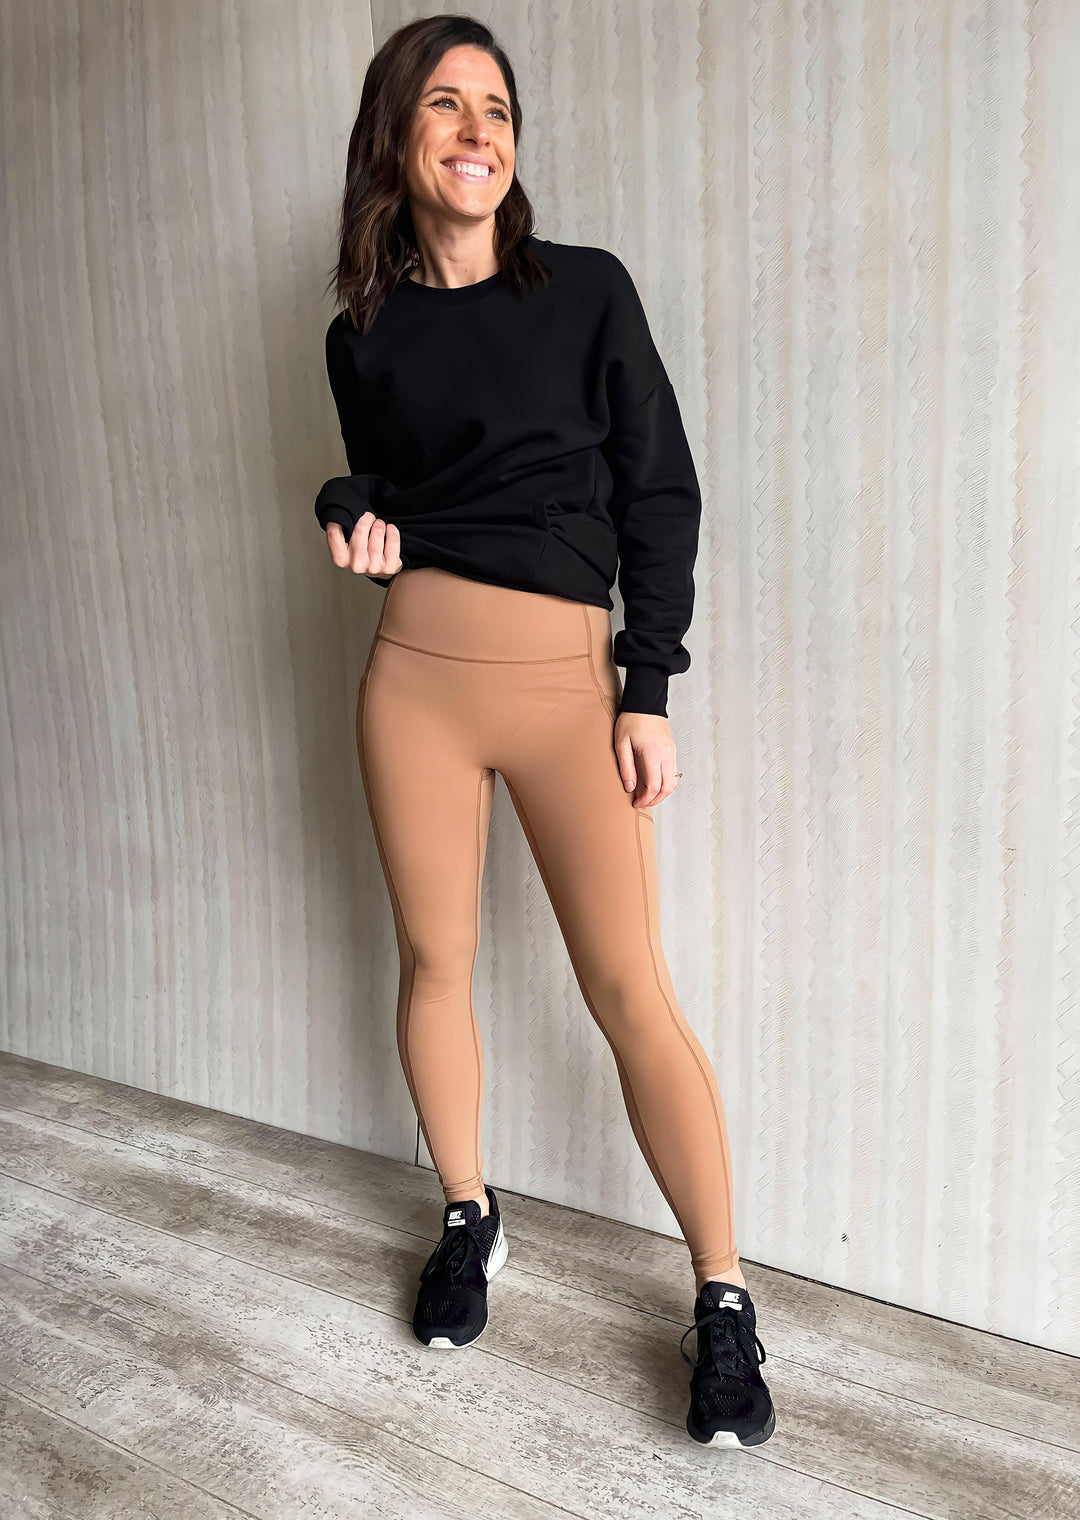 Women's Nude Colored Leggings / High Waisted Leggings / Women's Athleisure Clothes